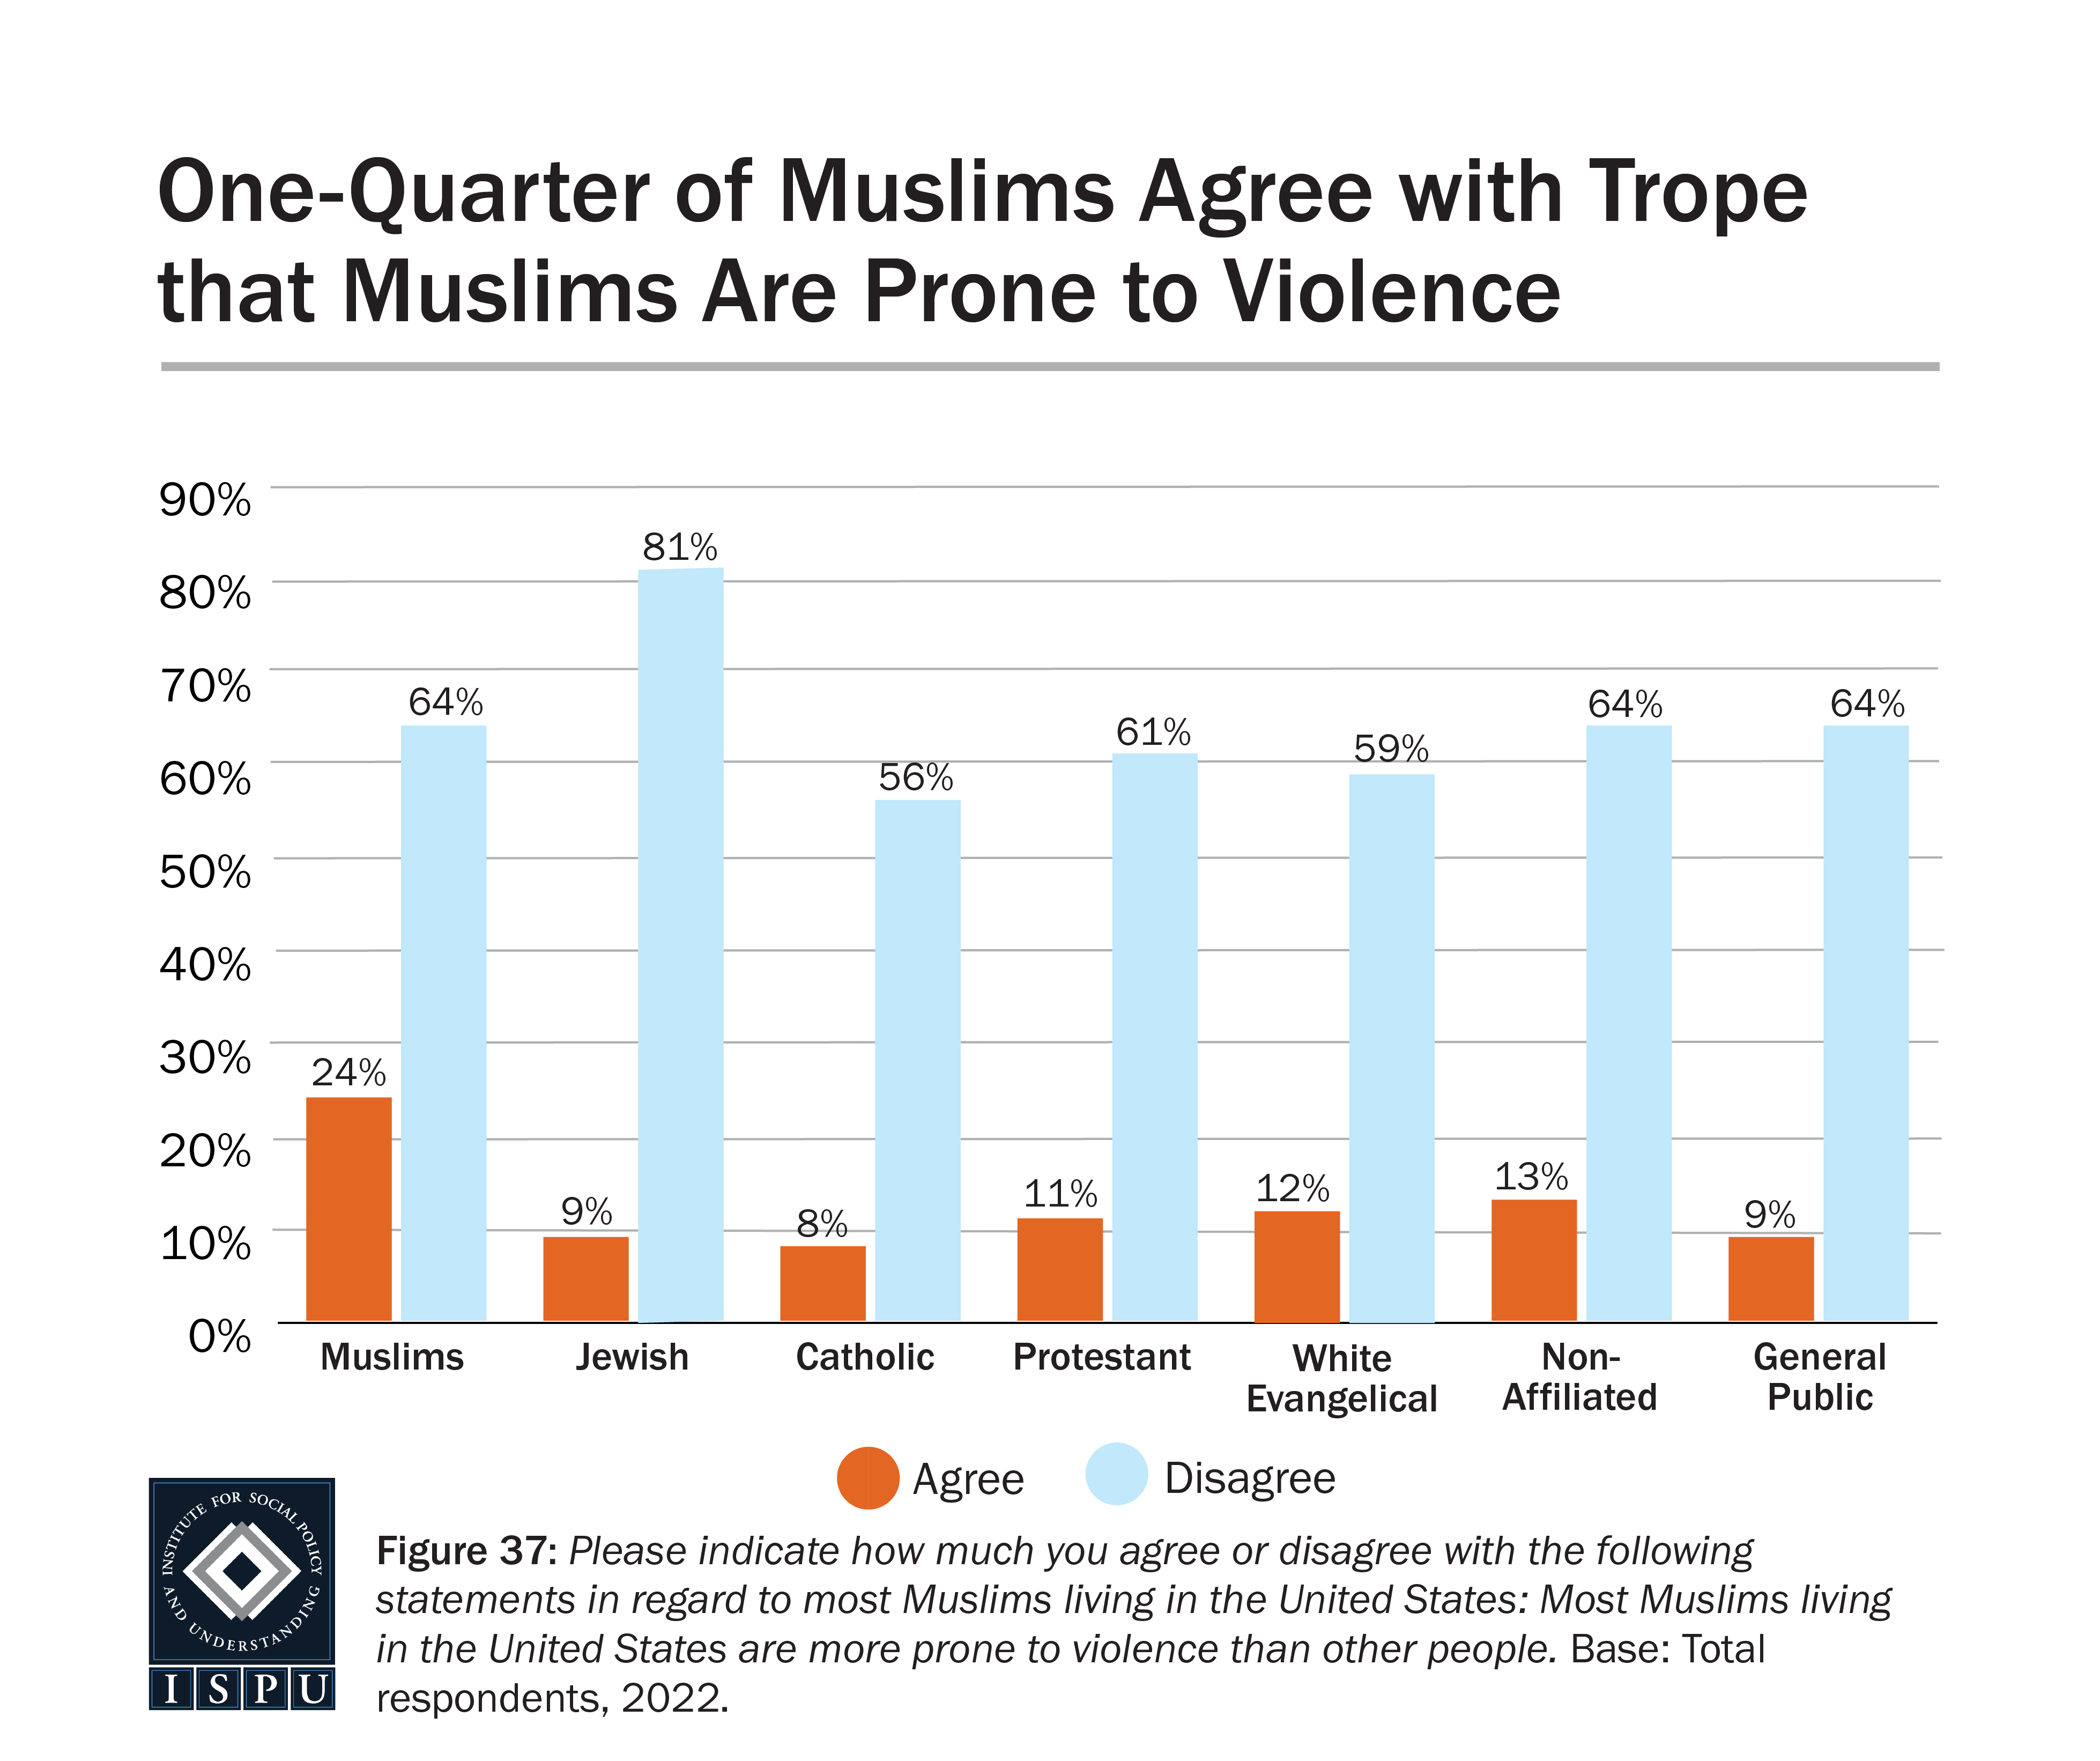 A bar graph showing the proportion of all groups surveyed who agree or disagree with the false notion that most Muslims living in the US are more prone to violence than others.